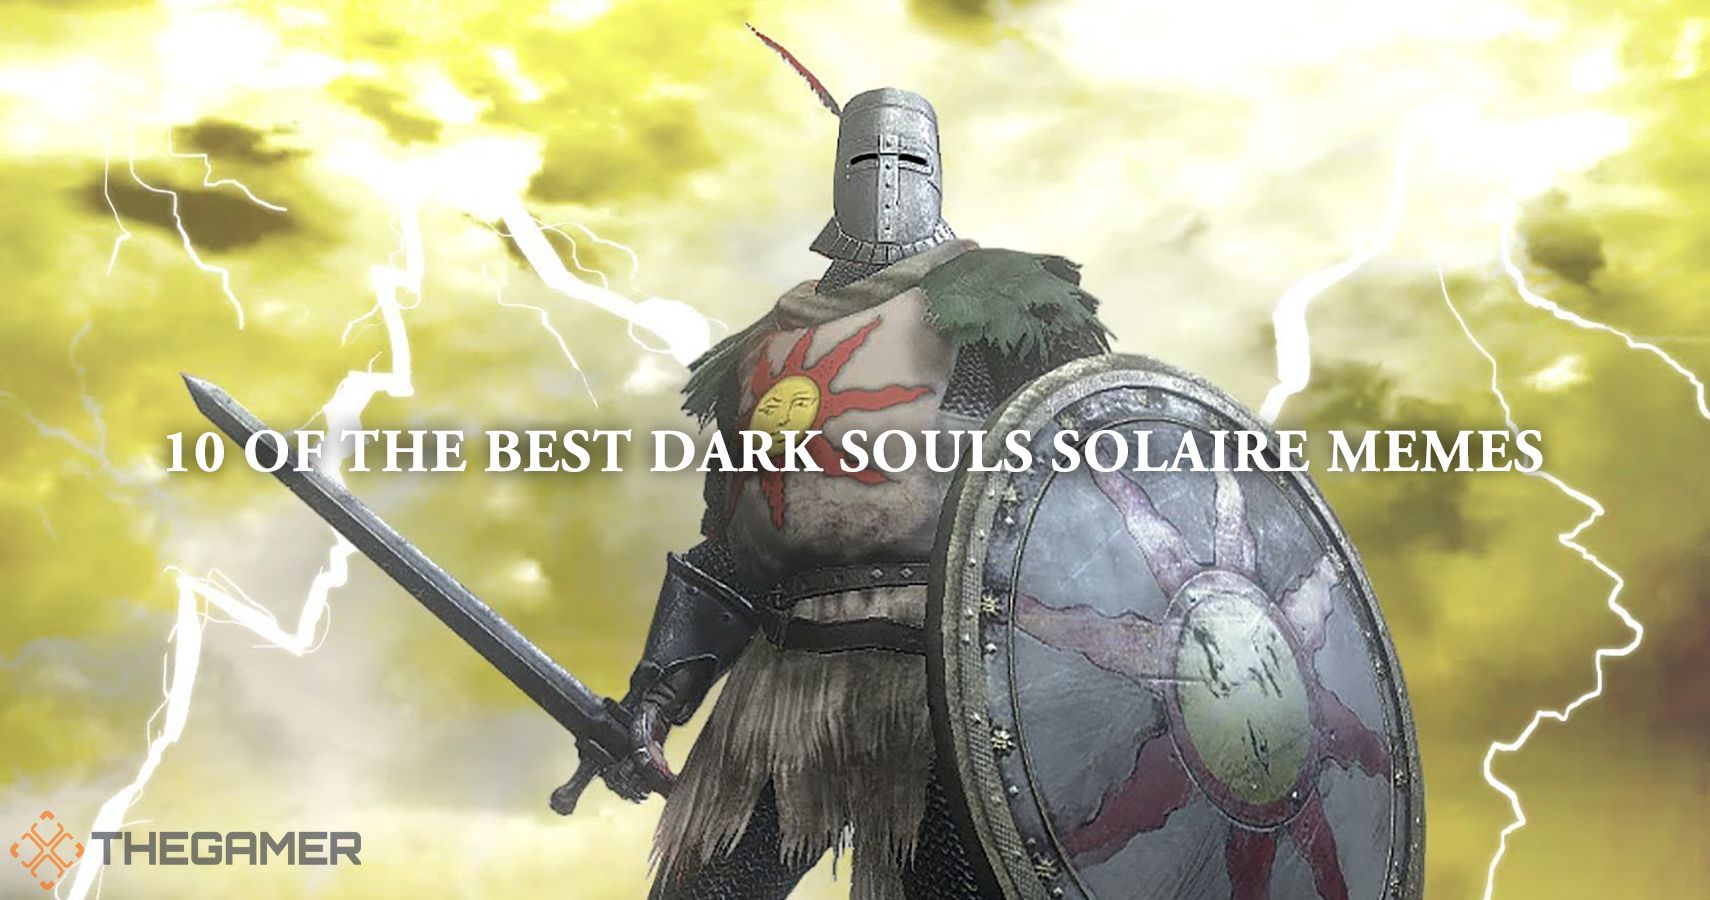 10 Of The Best Dark Souls Solaire Memes